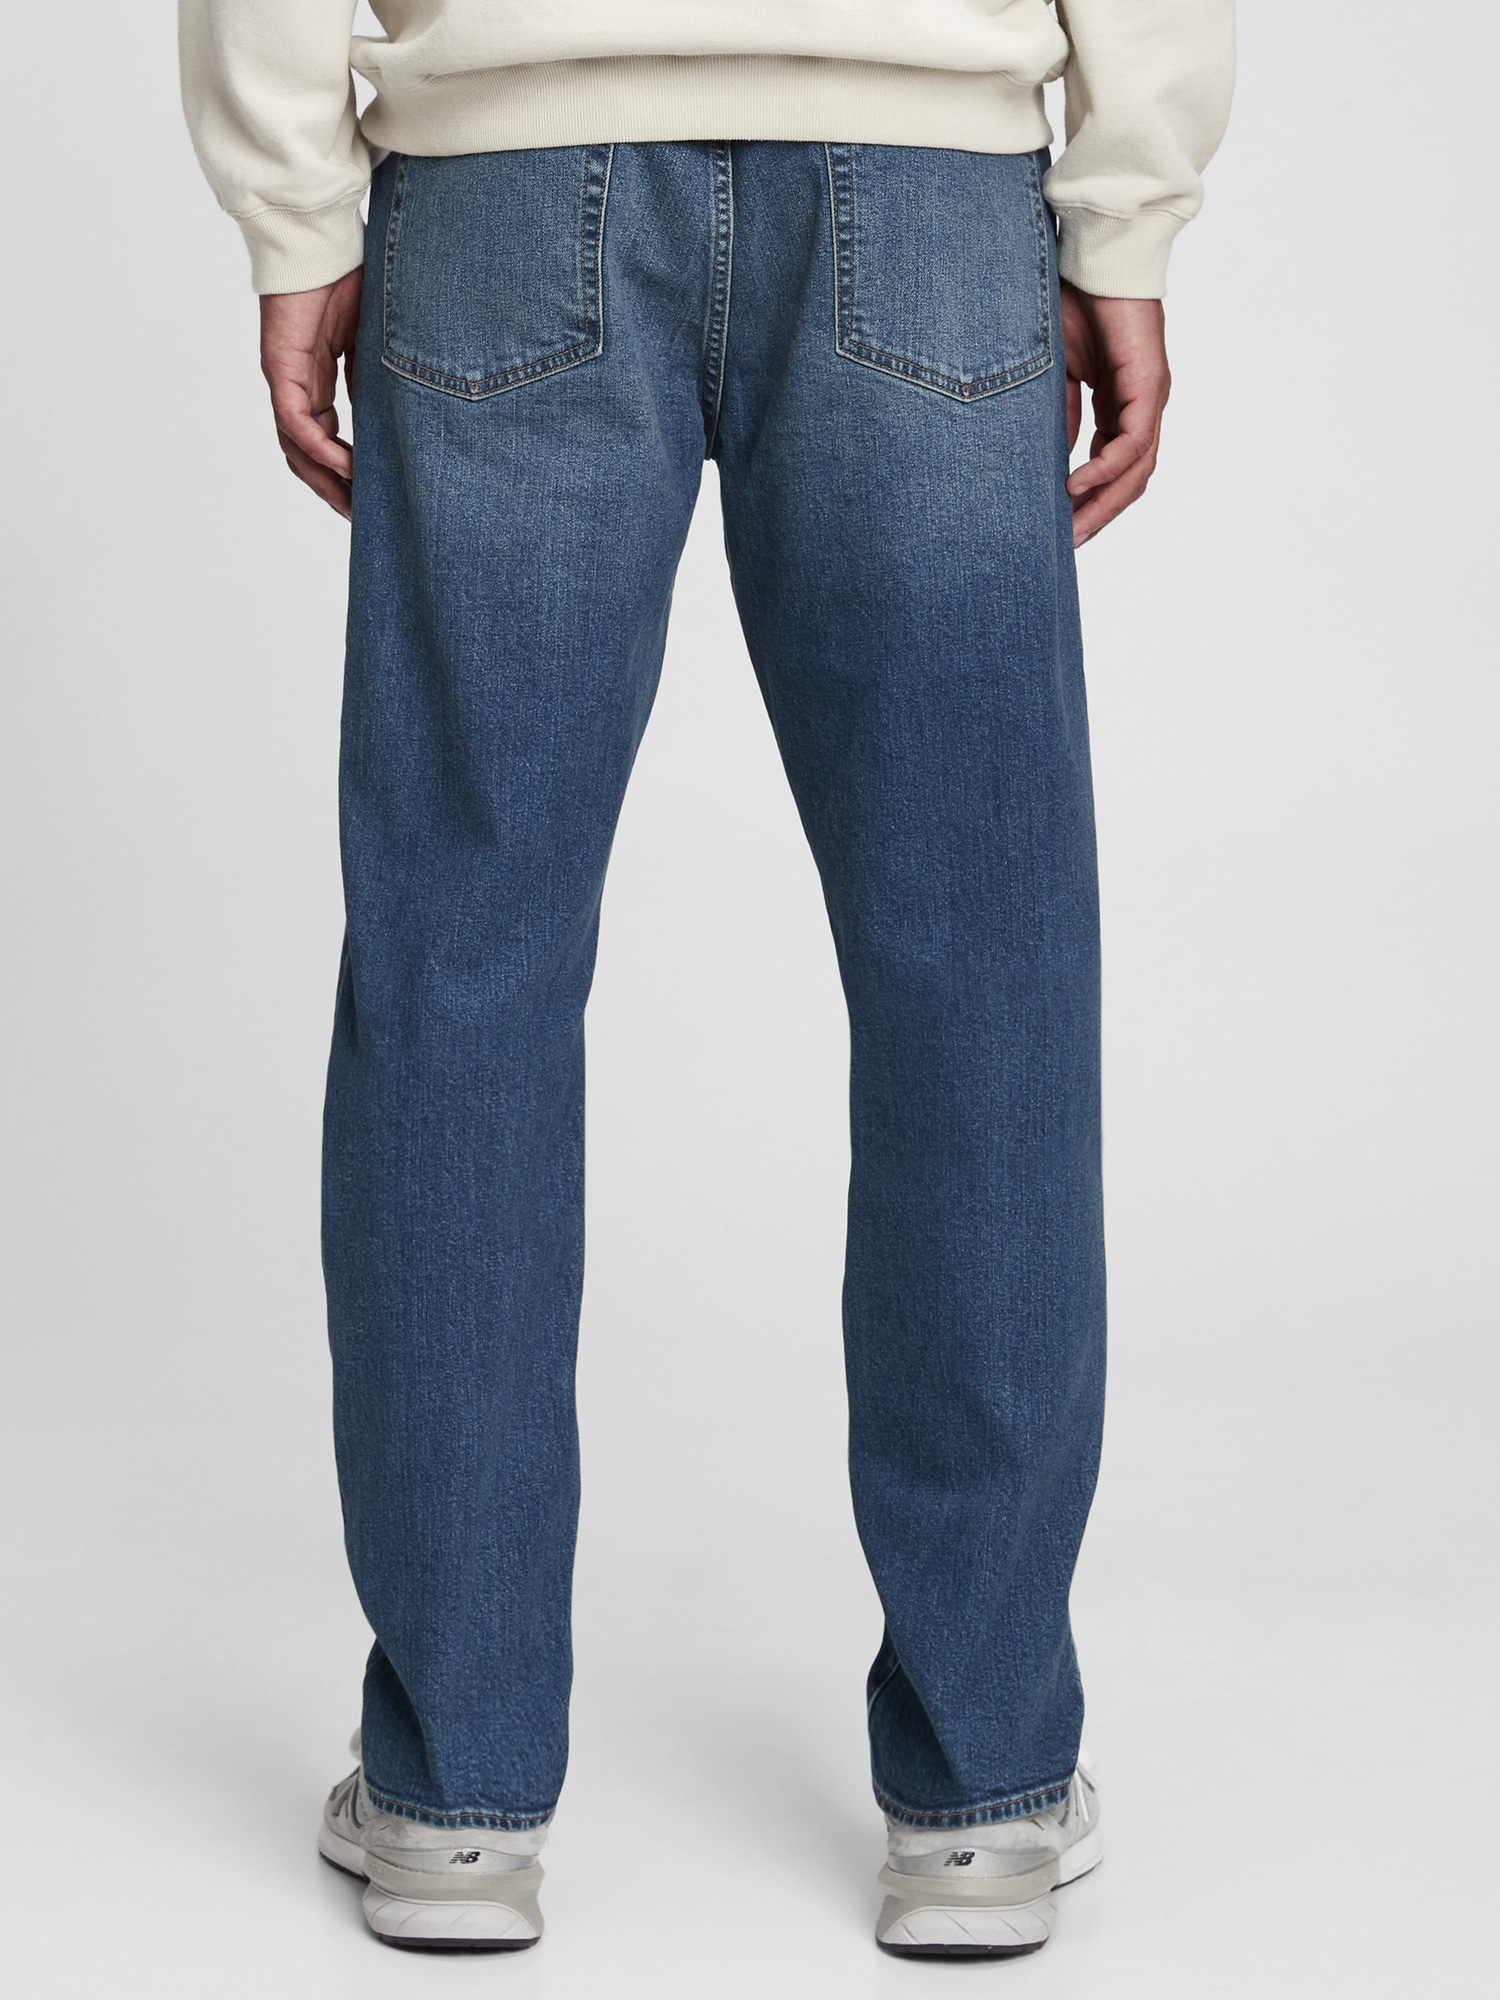 Buy Gap Stretch Slim Fit Soft Wear Washwell Jeans from the Gap online shop